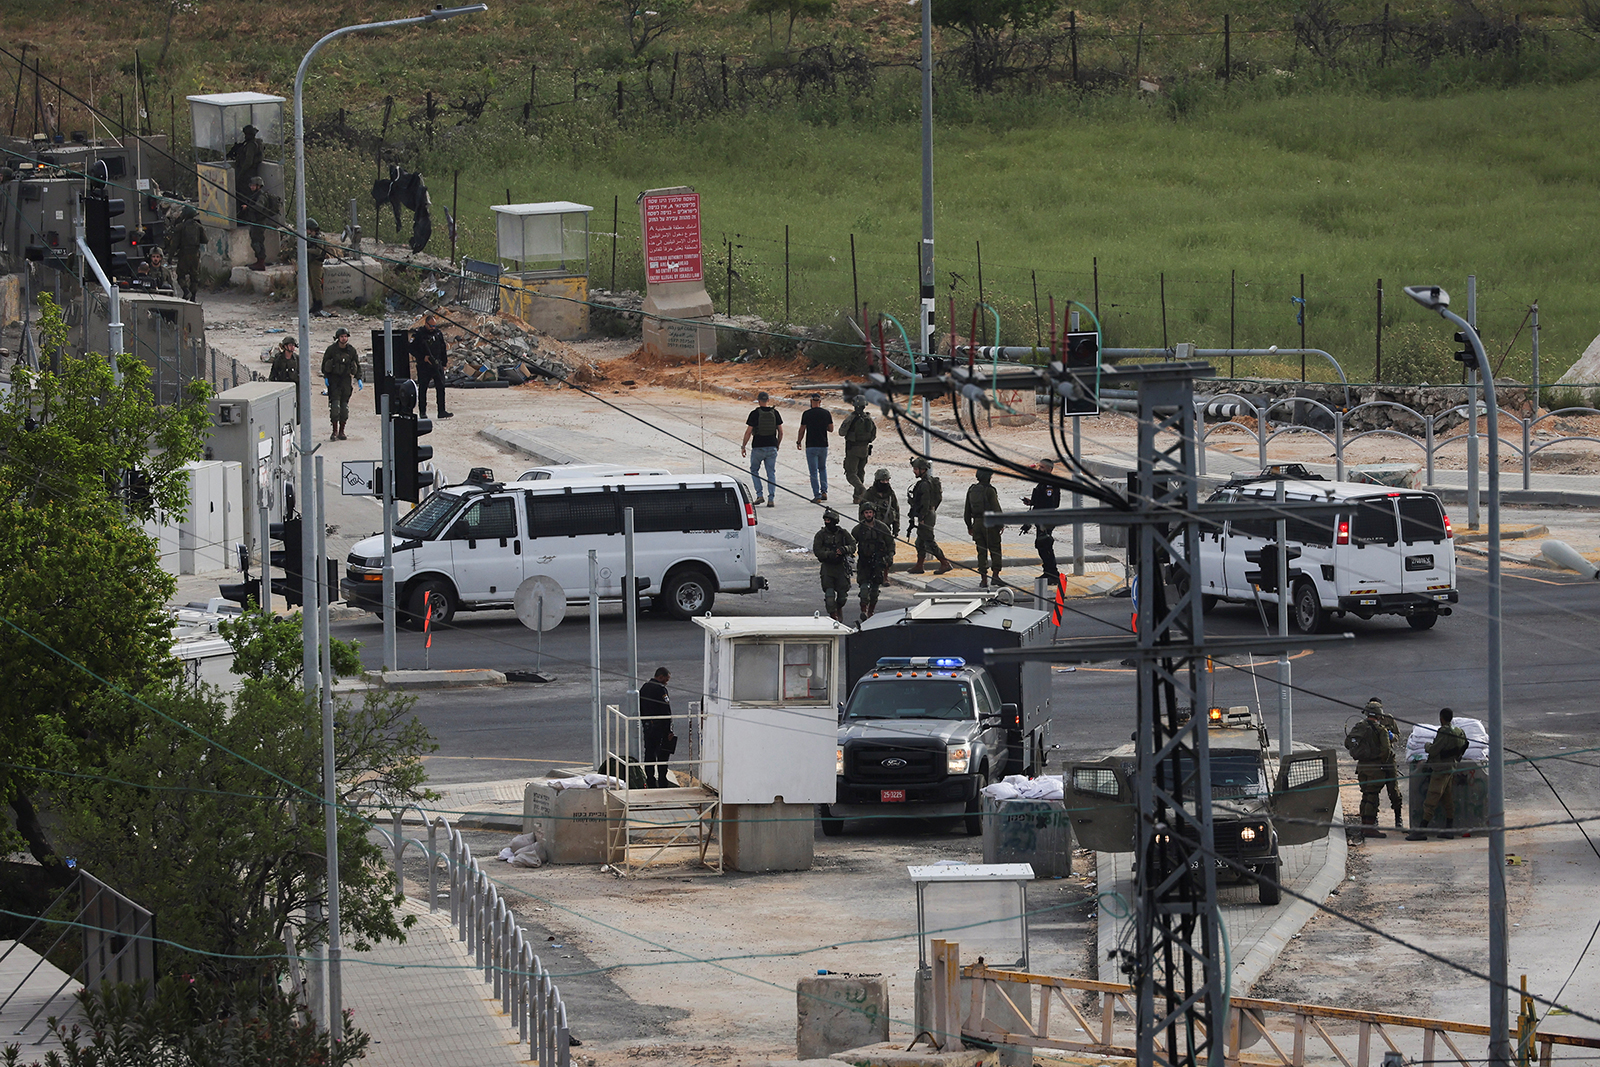 Israeli soldiers stand guard near the scene of a shooting near Hebron in the Israeli-occupied West Bank on April 21.